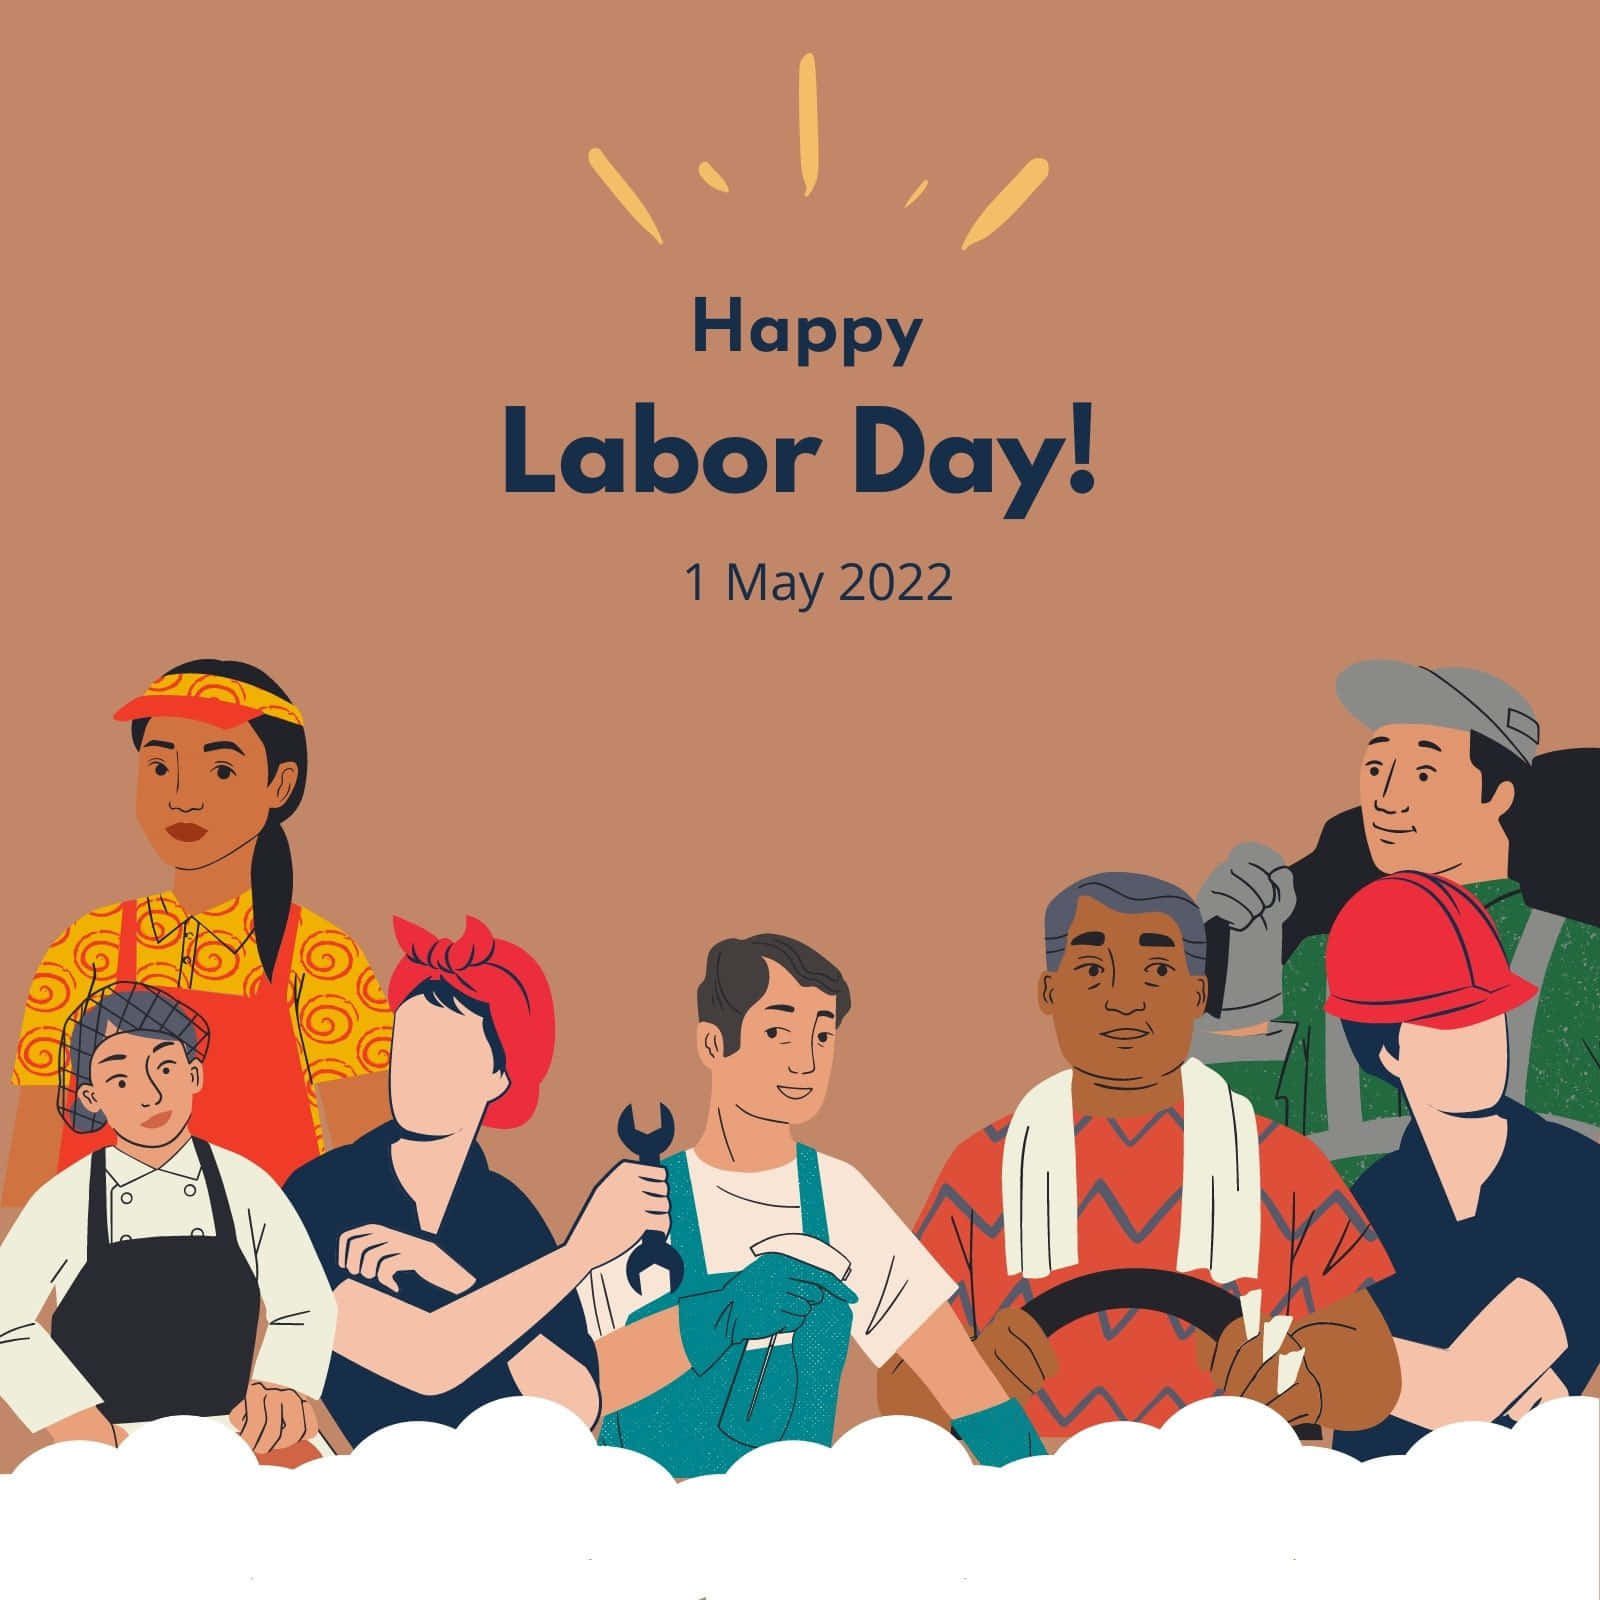 Celebrate Labor Day with your family and friends!